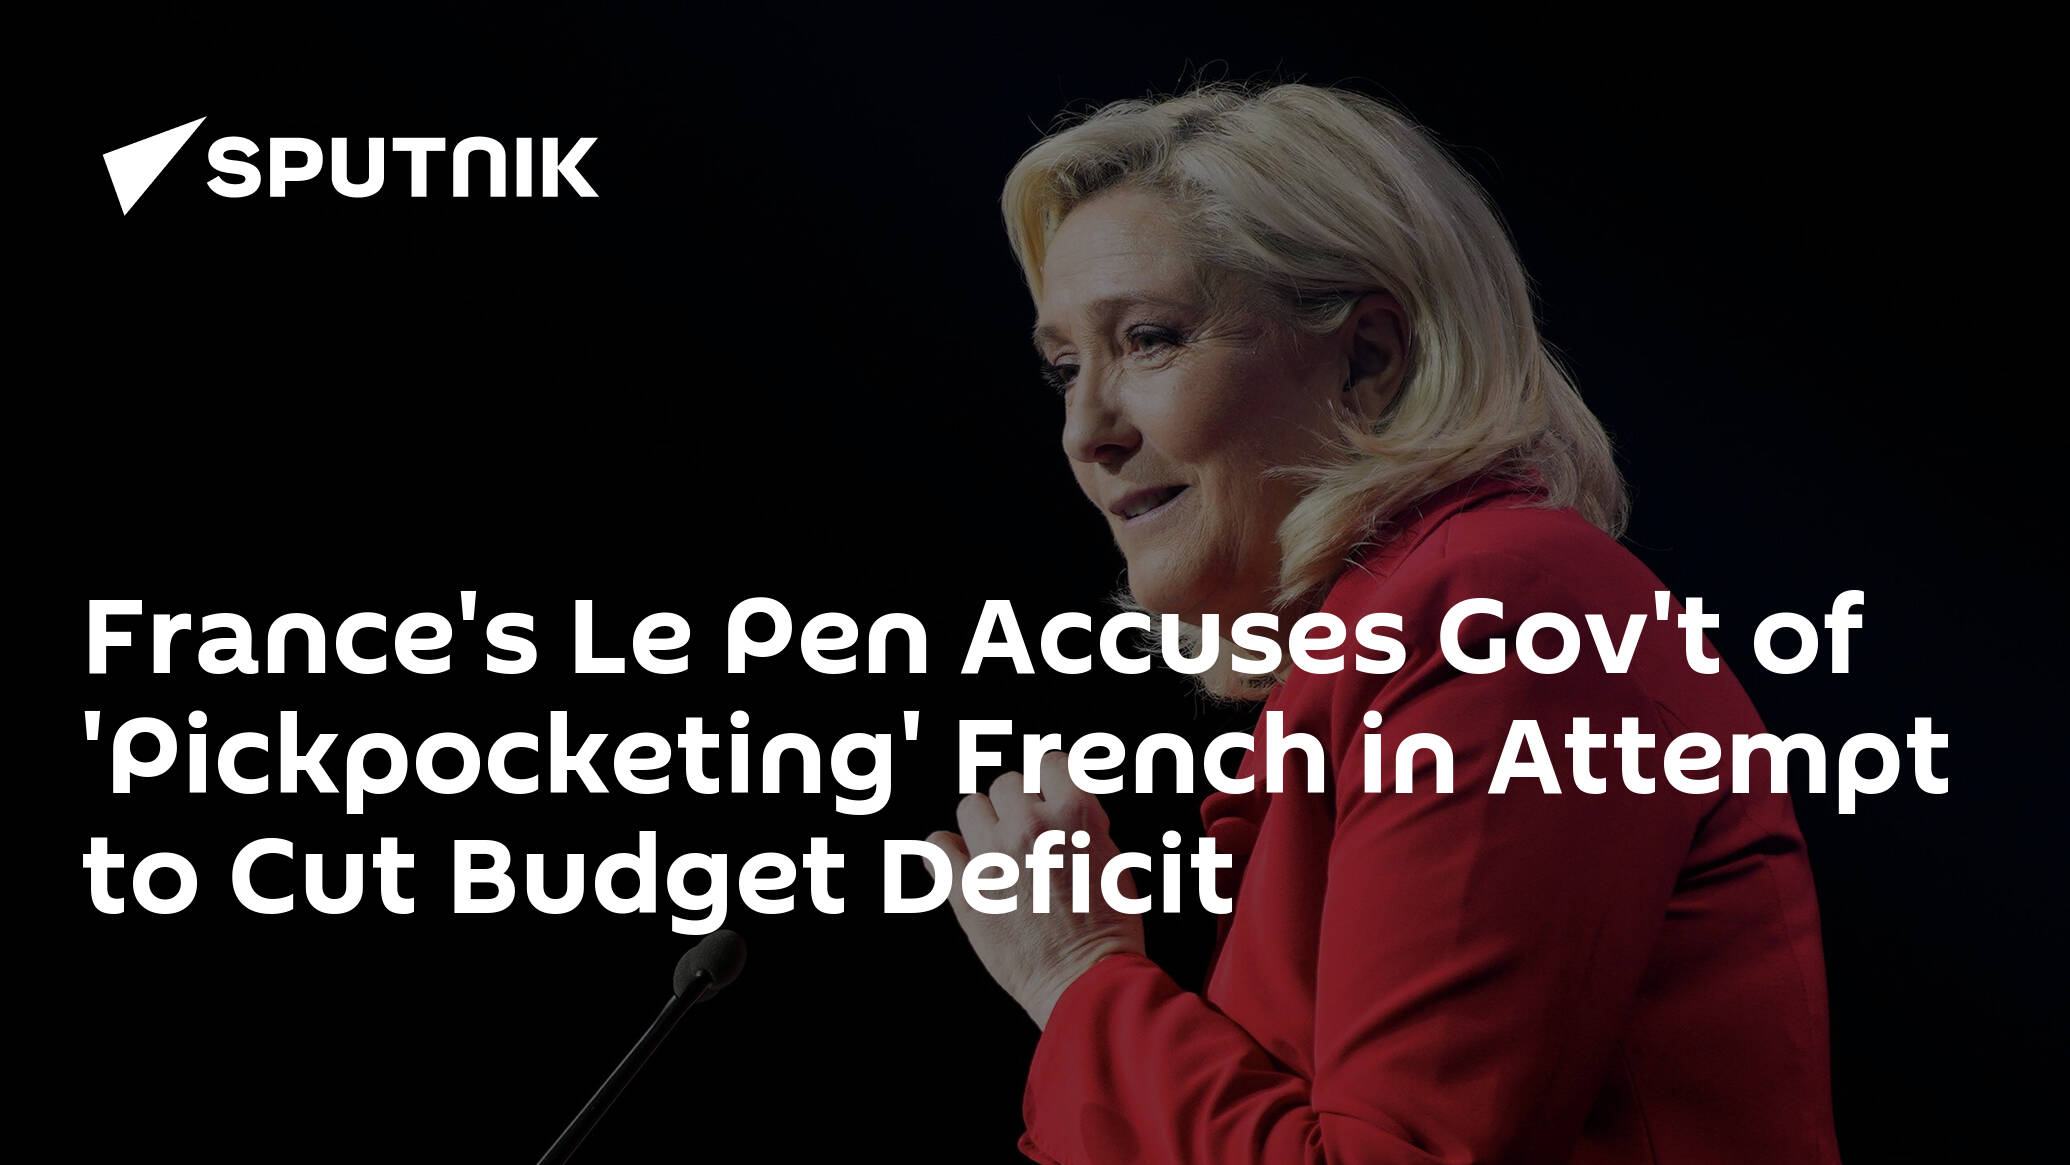 France's Le Pen Accuses Gov't of 'Pickpocketing' French in Attempt to Cut Budget Deficit